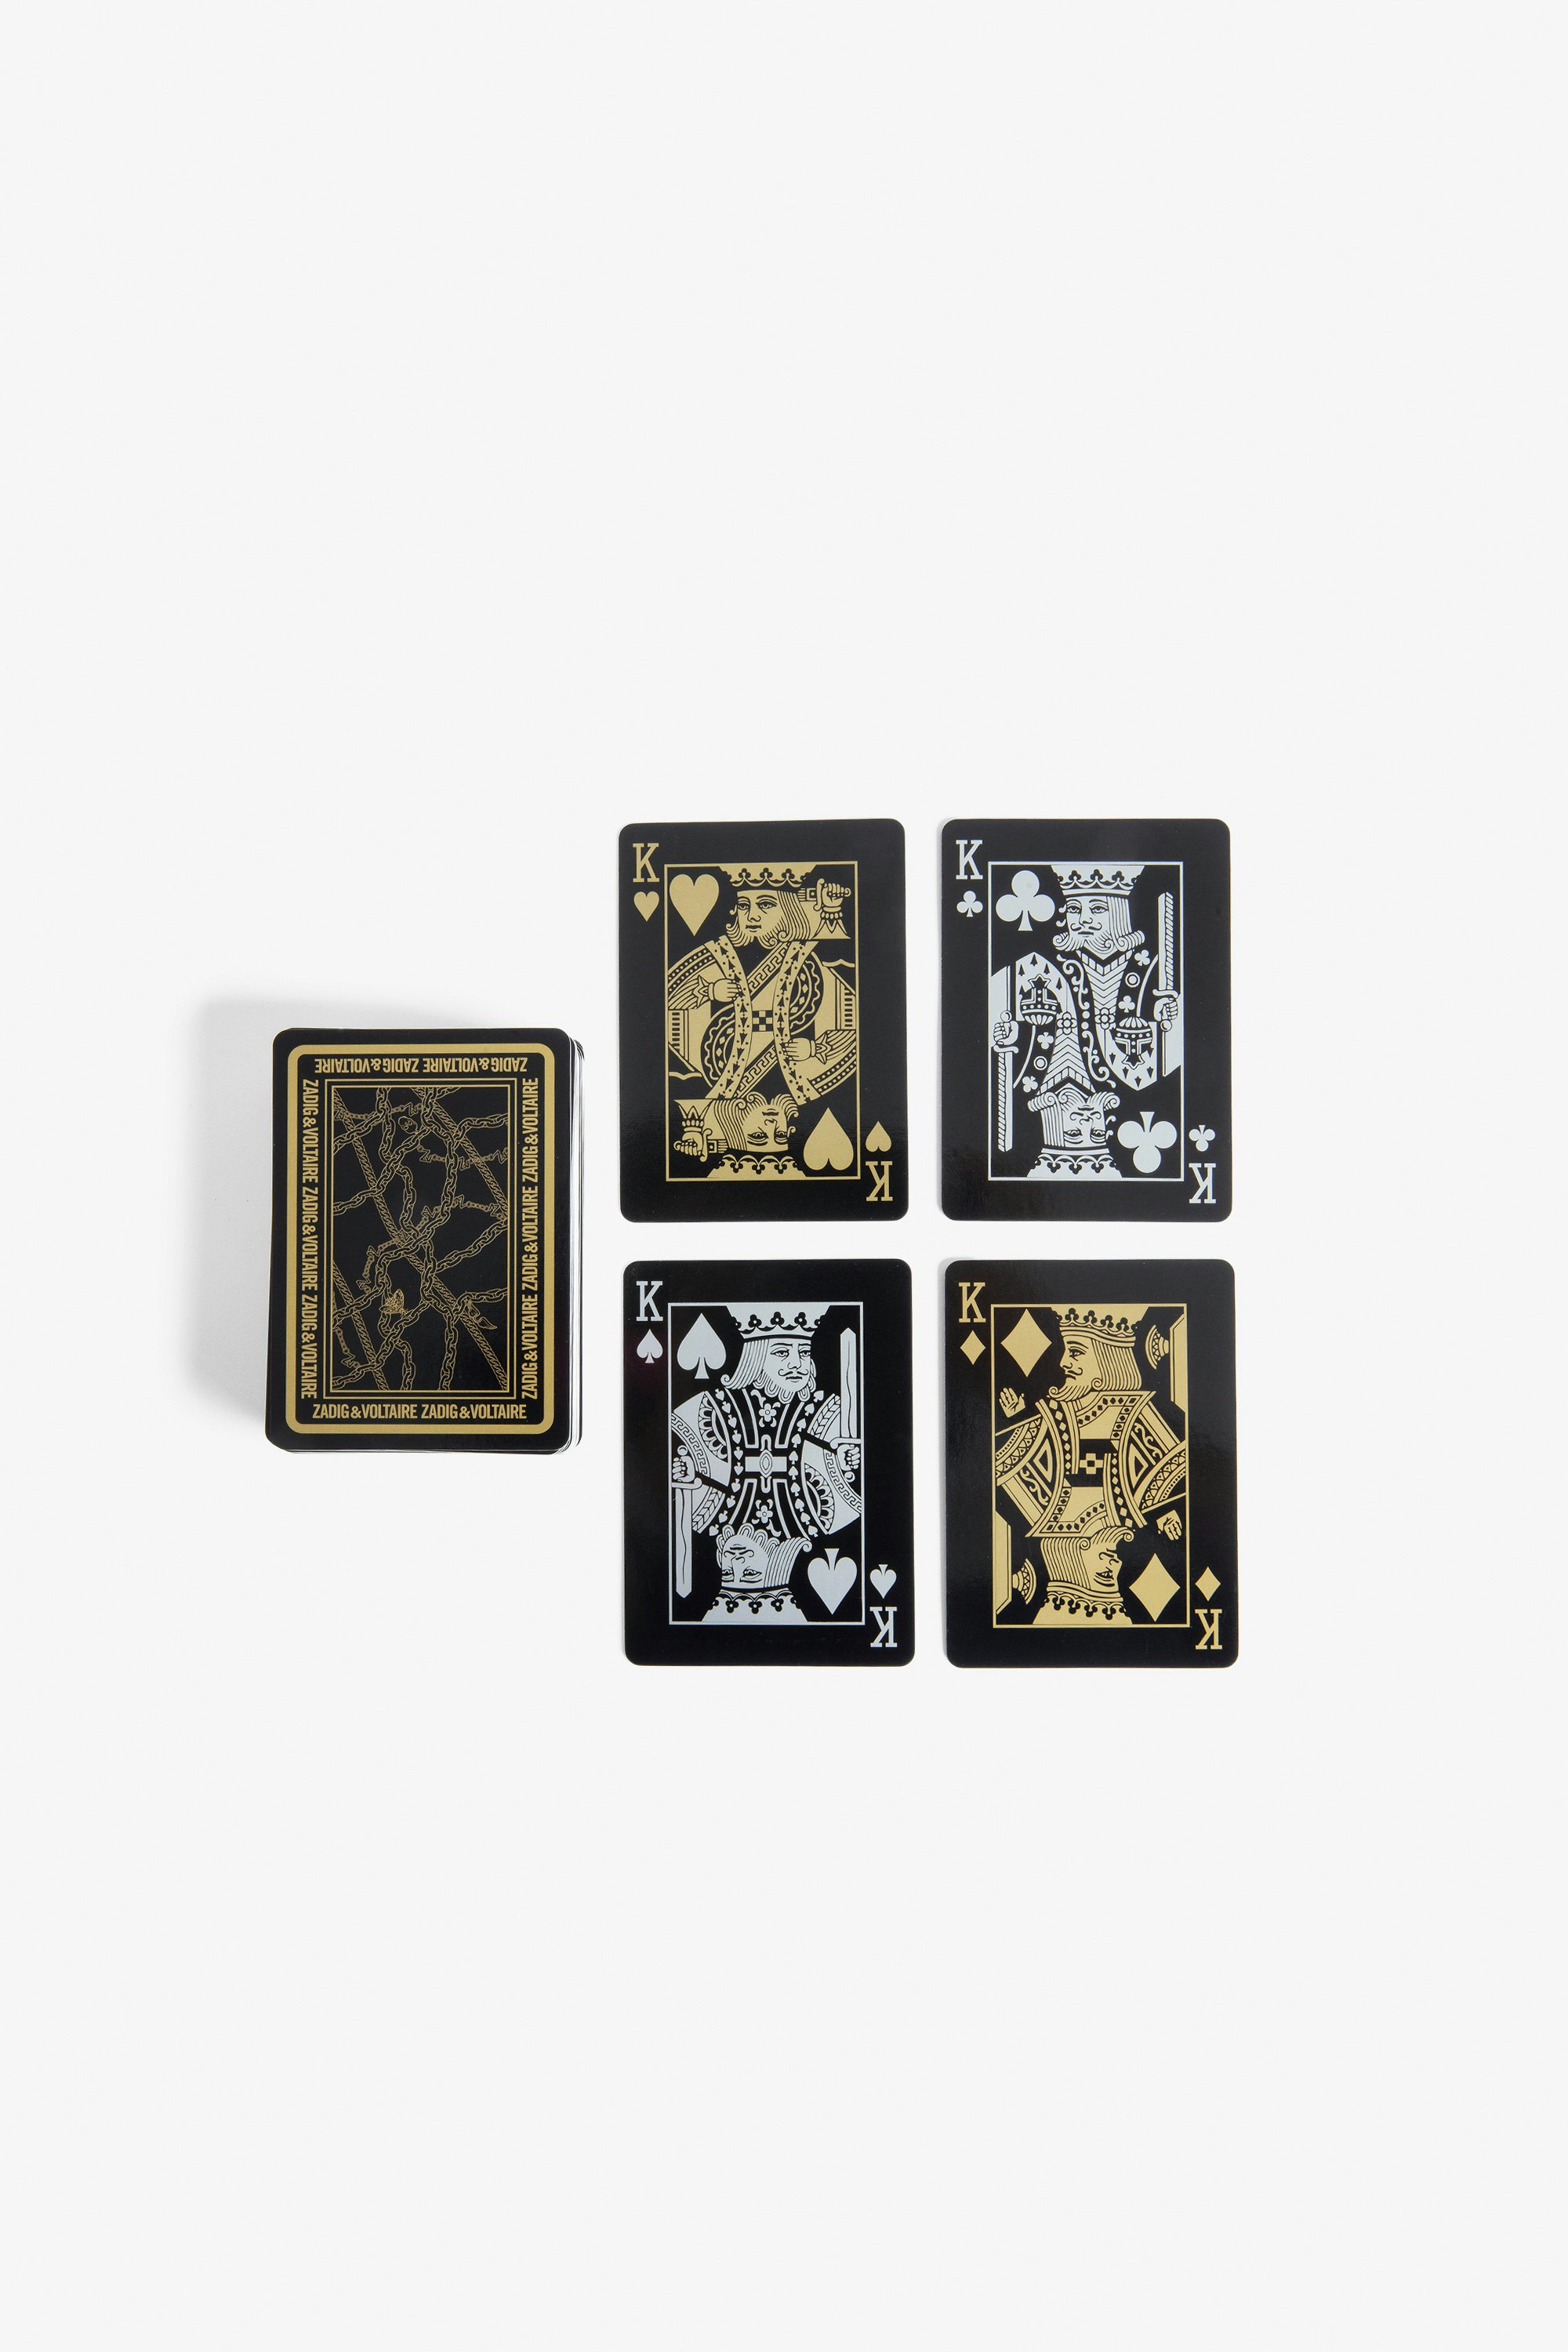 Play With Me Card Deck - Voltaire Vice card game and box.